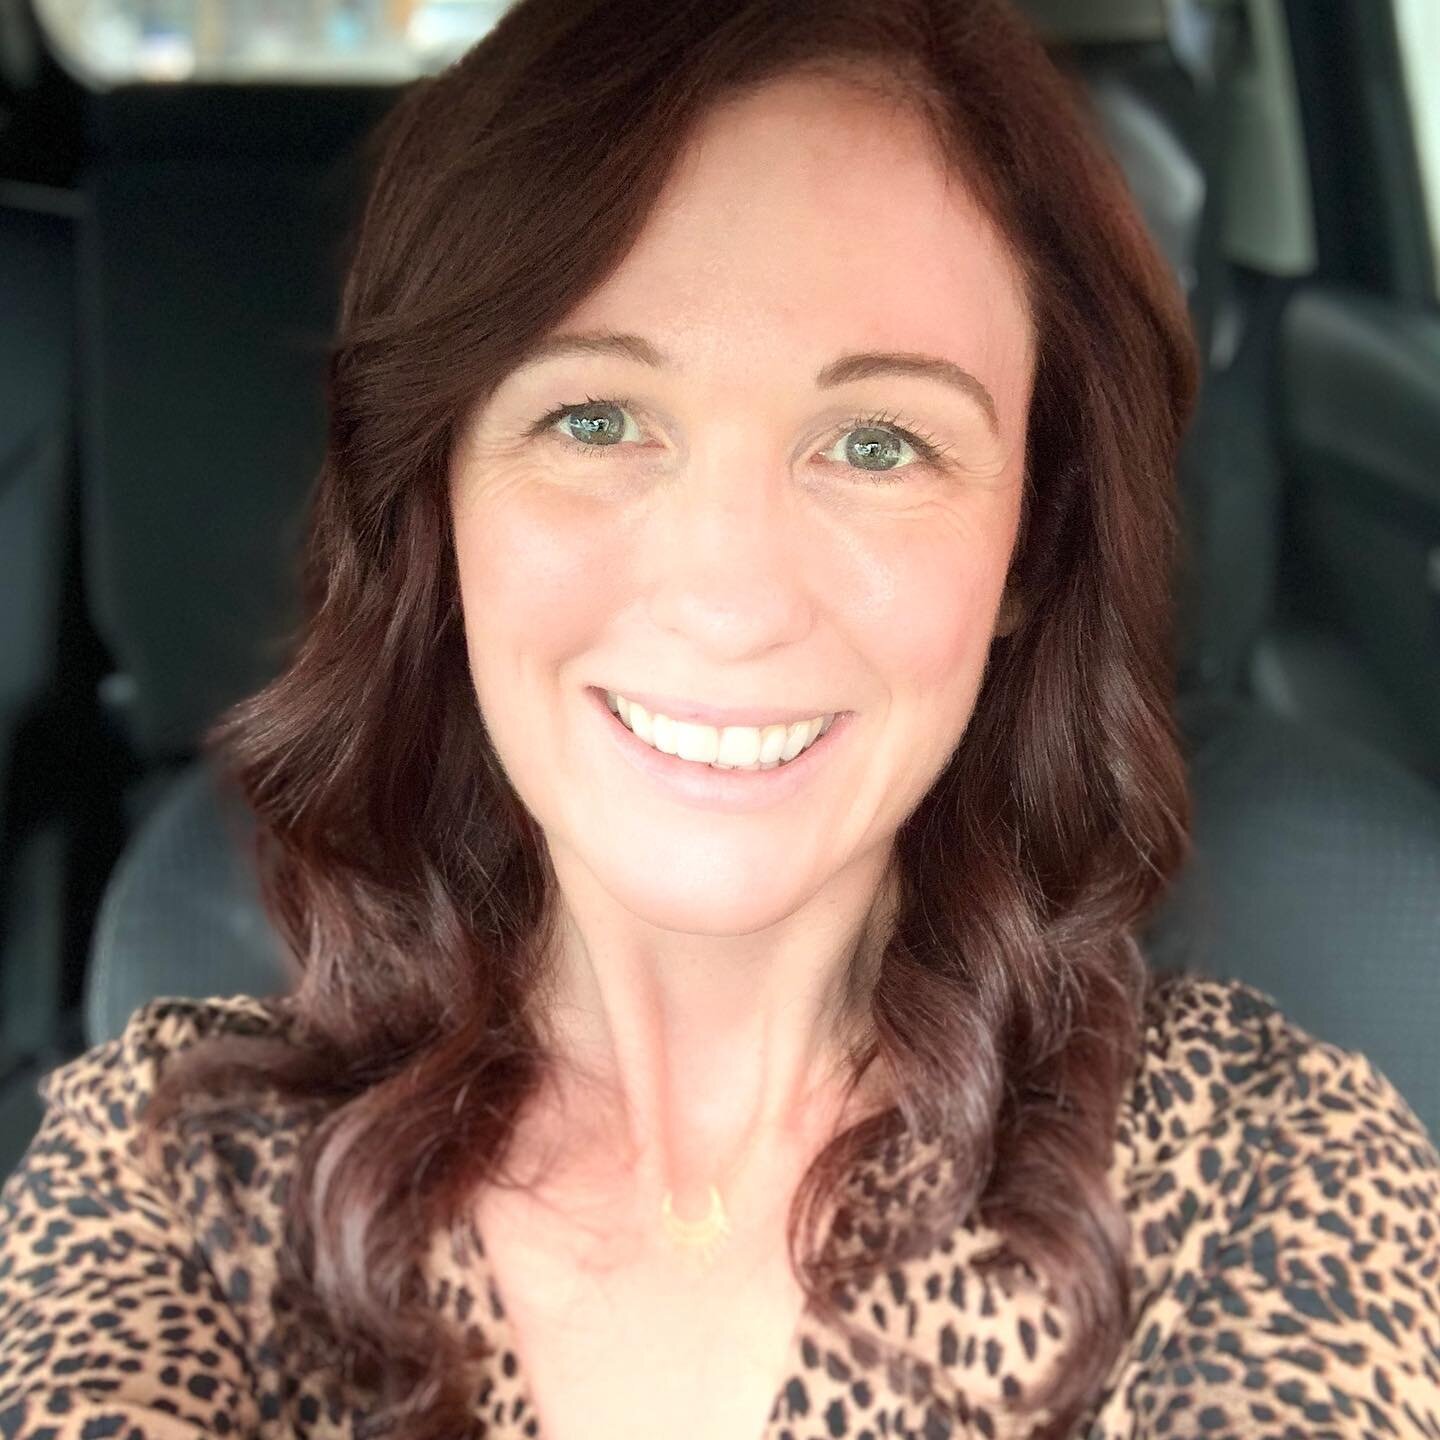 Happy Friday, Sunbreak Massage community! Most of you are used to seeing me on Fridays in my Fremont office&mdash;and you still can&mdash;but I wanted to pop in and share the exciting news that, starting in October, I will also begin offering massage